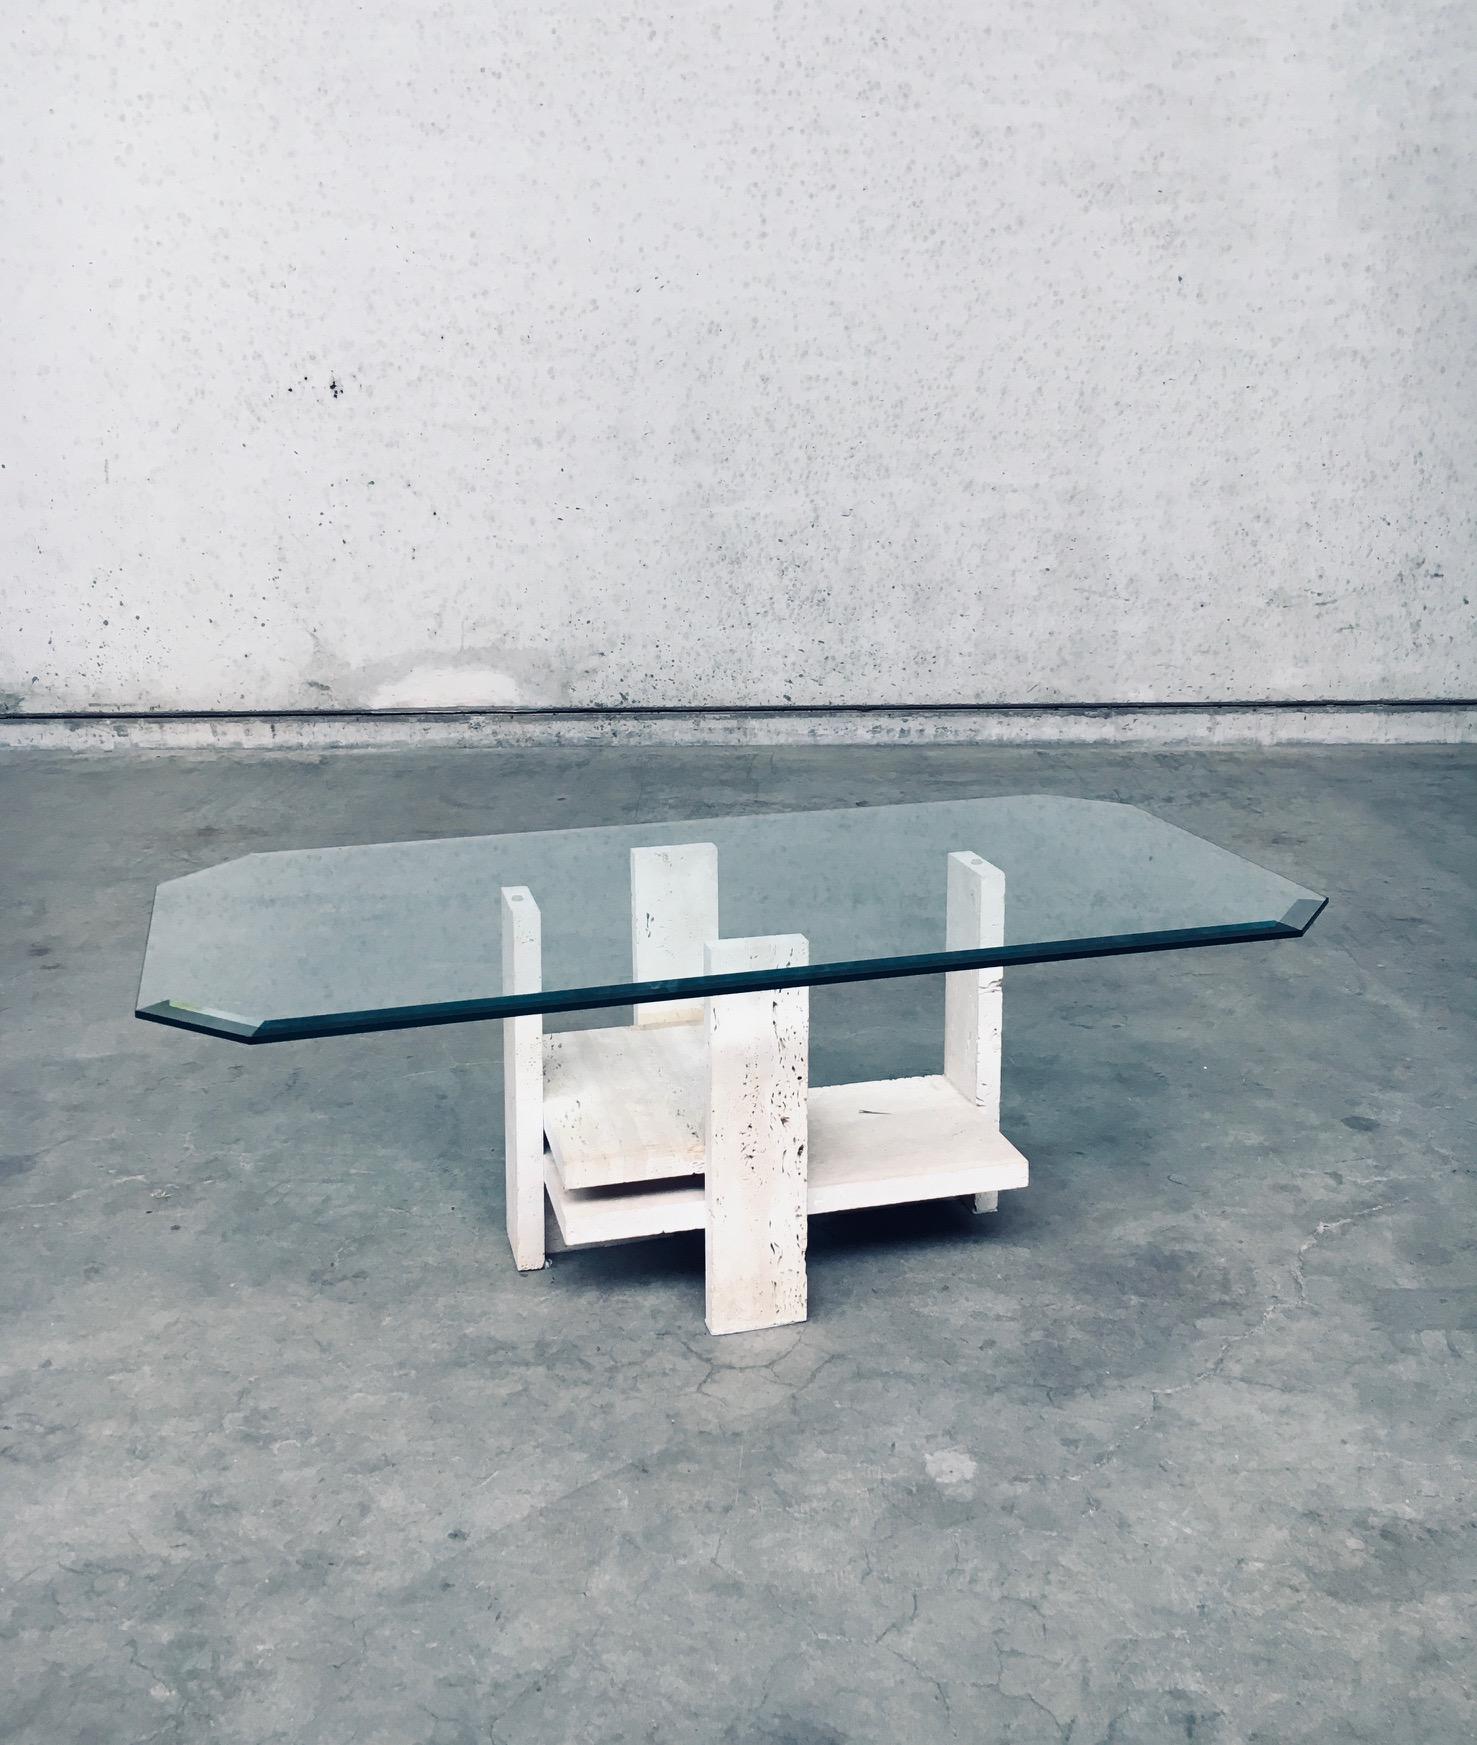 Vintage Architectural Brutalist Design Coffee Table by Willy Ballez. Made in Belgium in the 1970's period. Travertine Marble Architectural Base with octagonal glass top. This comes in very good, all original condition. Measures 42cm x 120cm x 60cm.